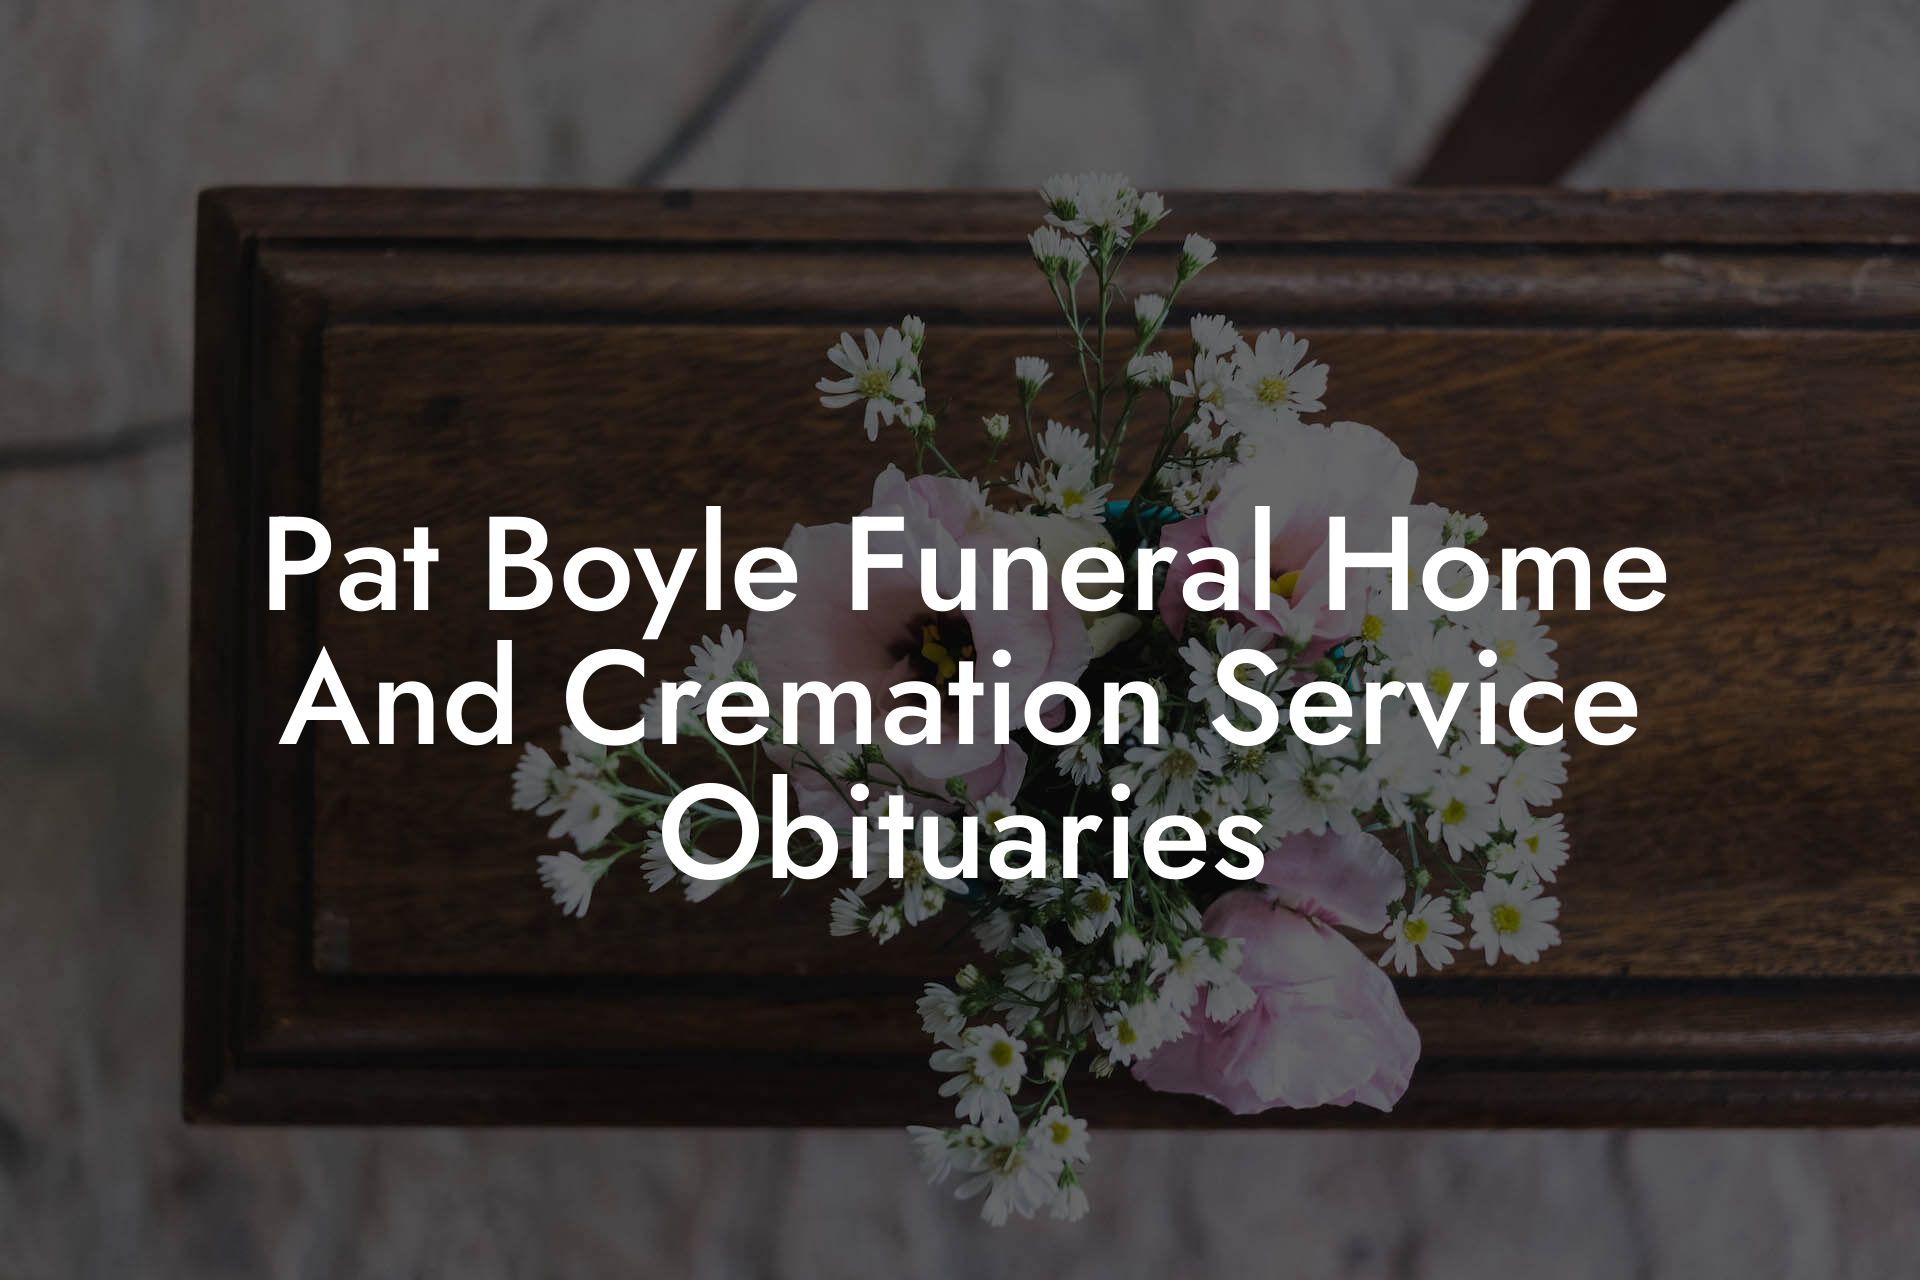 Pat Boyle Funeral Home and Cremation Service Obituaries Eulogy Assistant